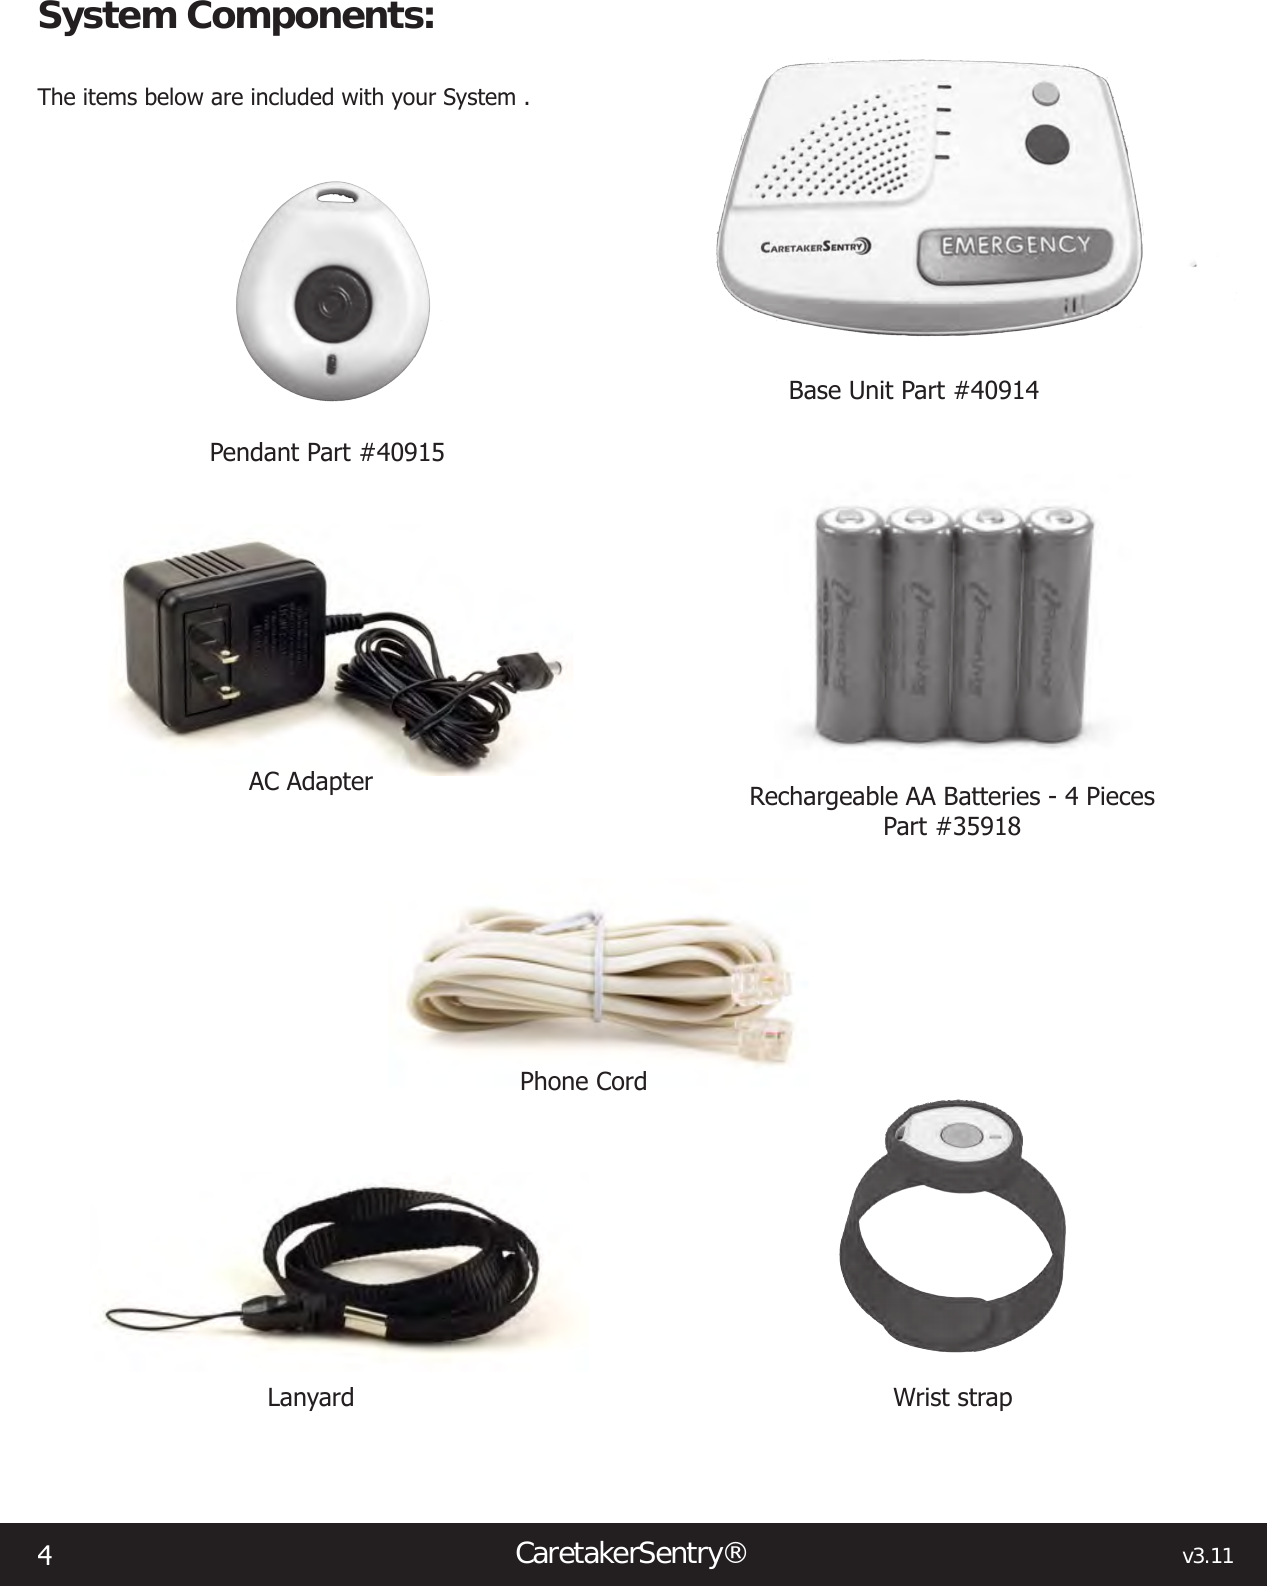 4CaretakerSentry®                                                                                  v3.11Pendant Part #40915AC AdapterPhone CordWrist strapLanyardRechargeable AA Batteries - 4 PiecesPart #35918System Components:The items below are included with your System . Base Unit Part #40914